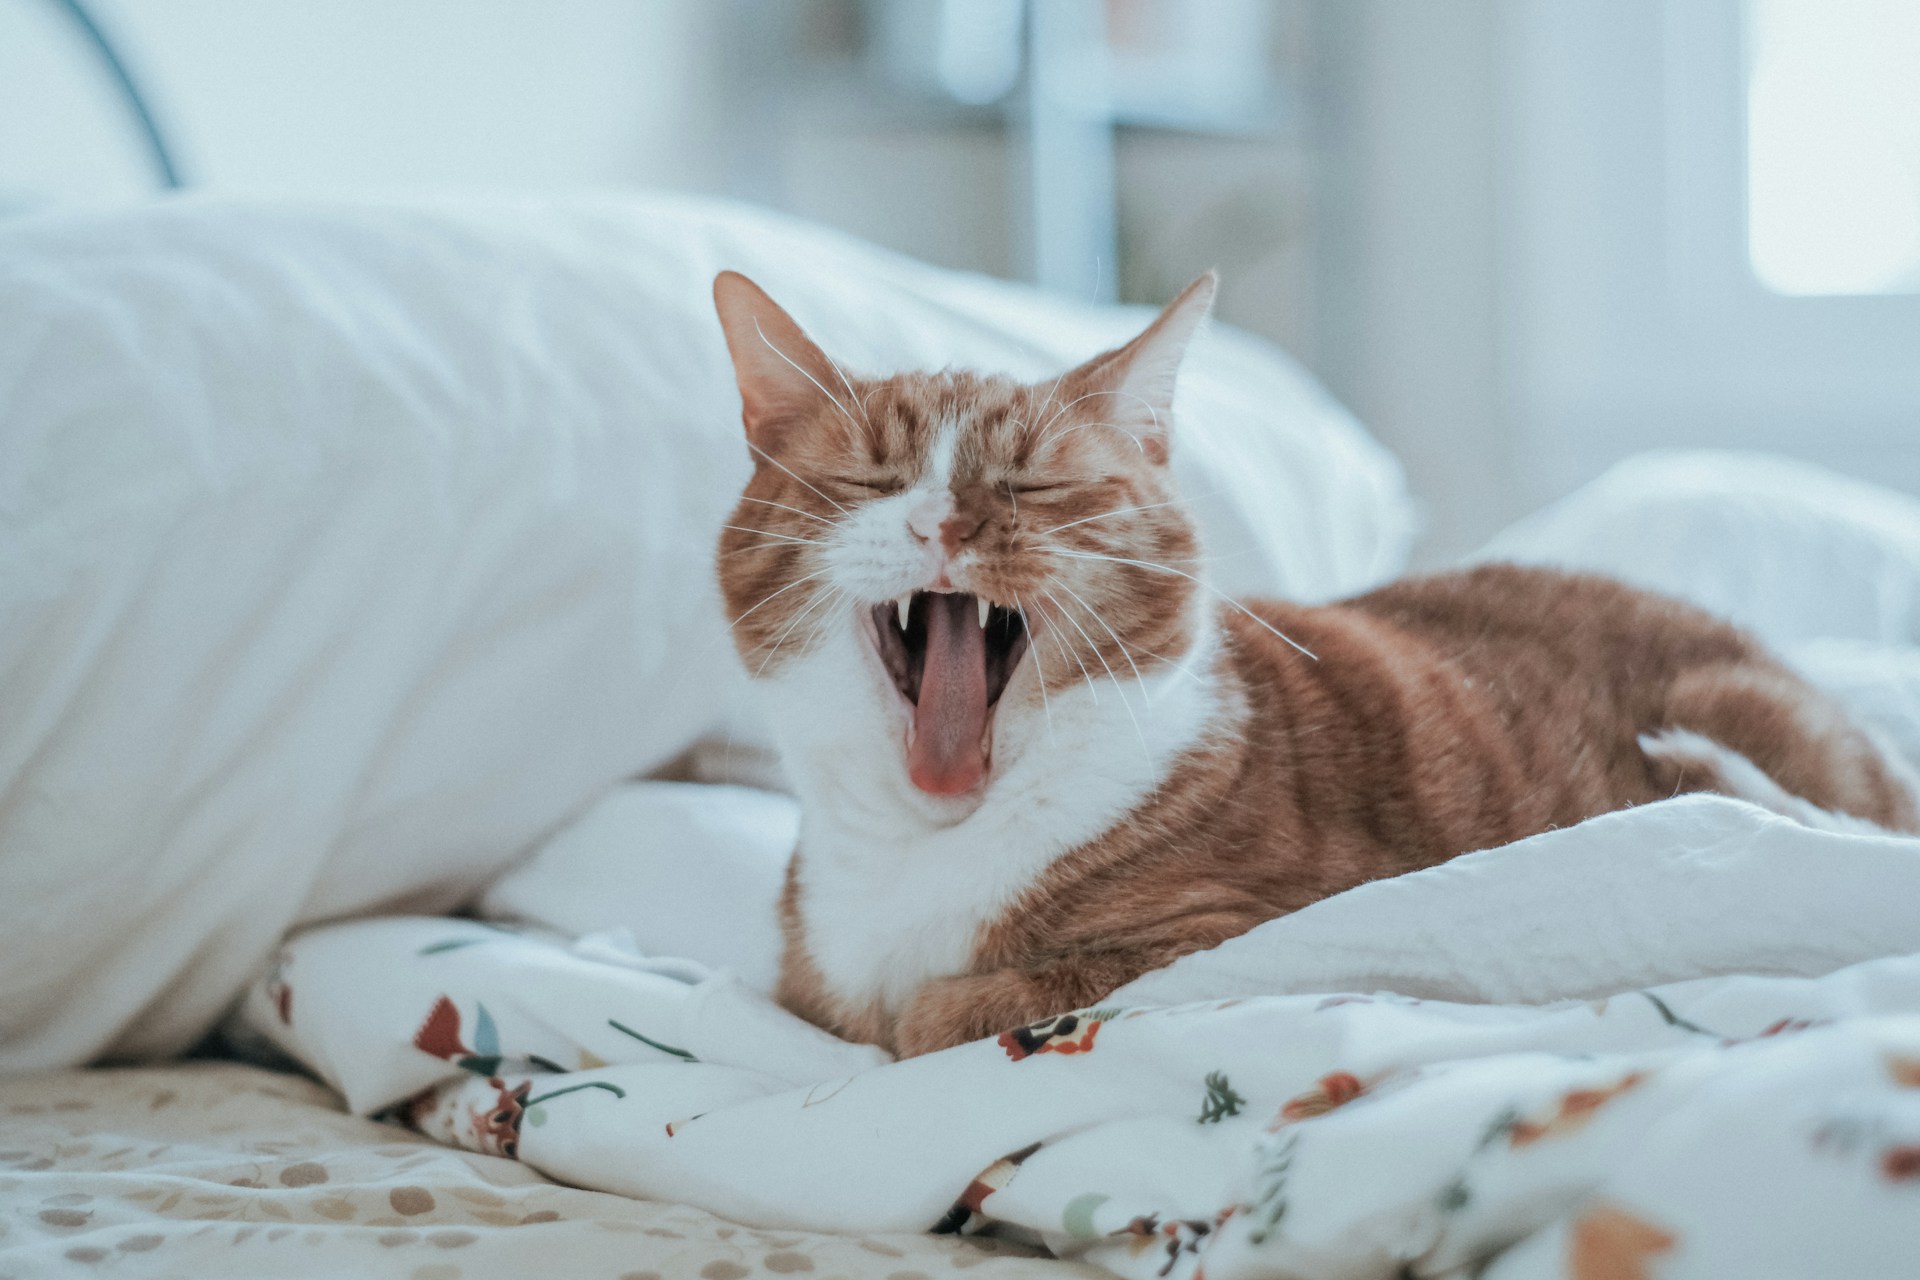 A cat yawning while sitting on a bed